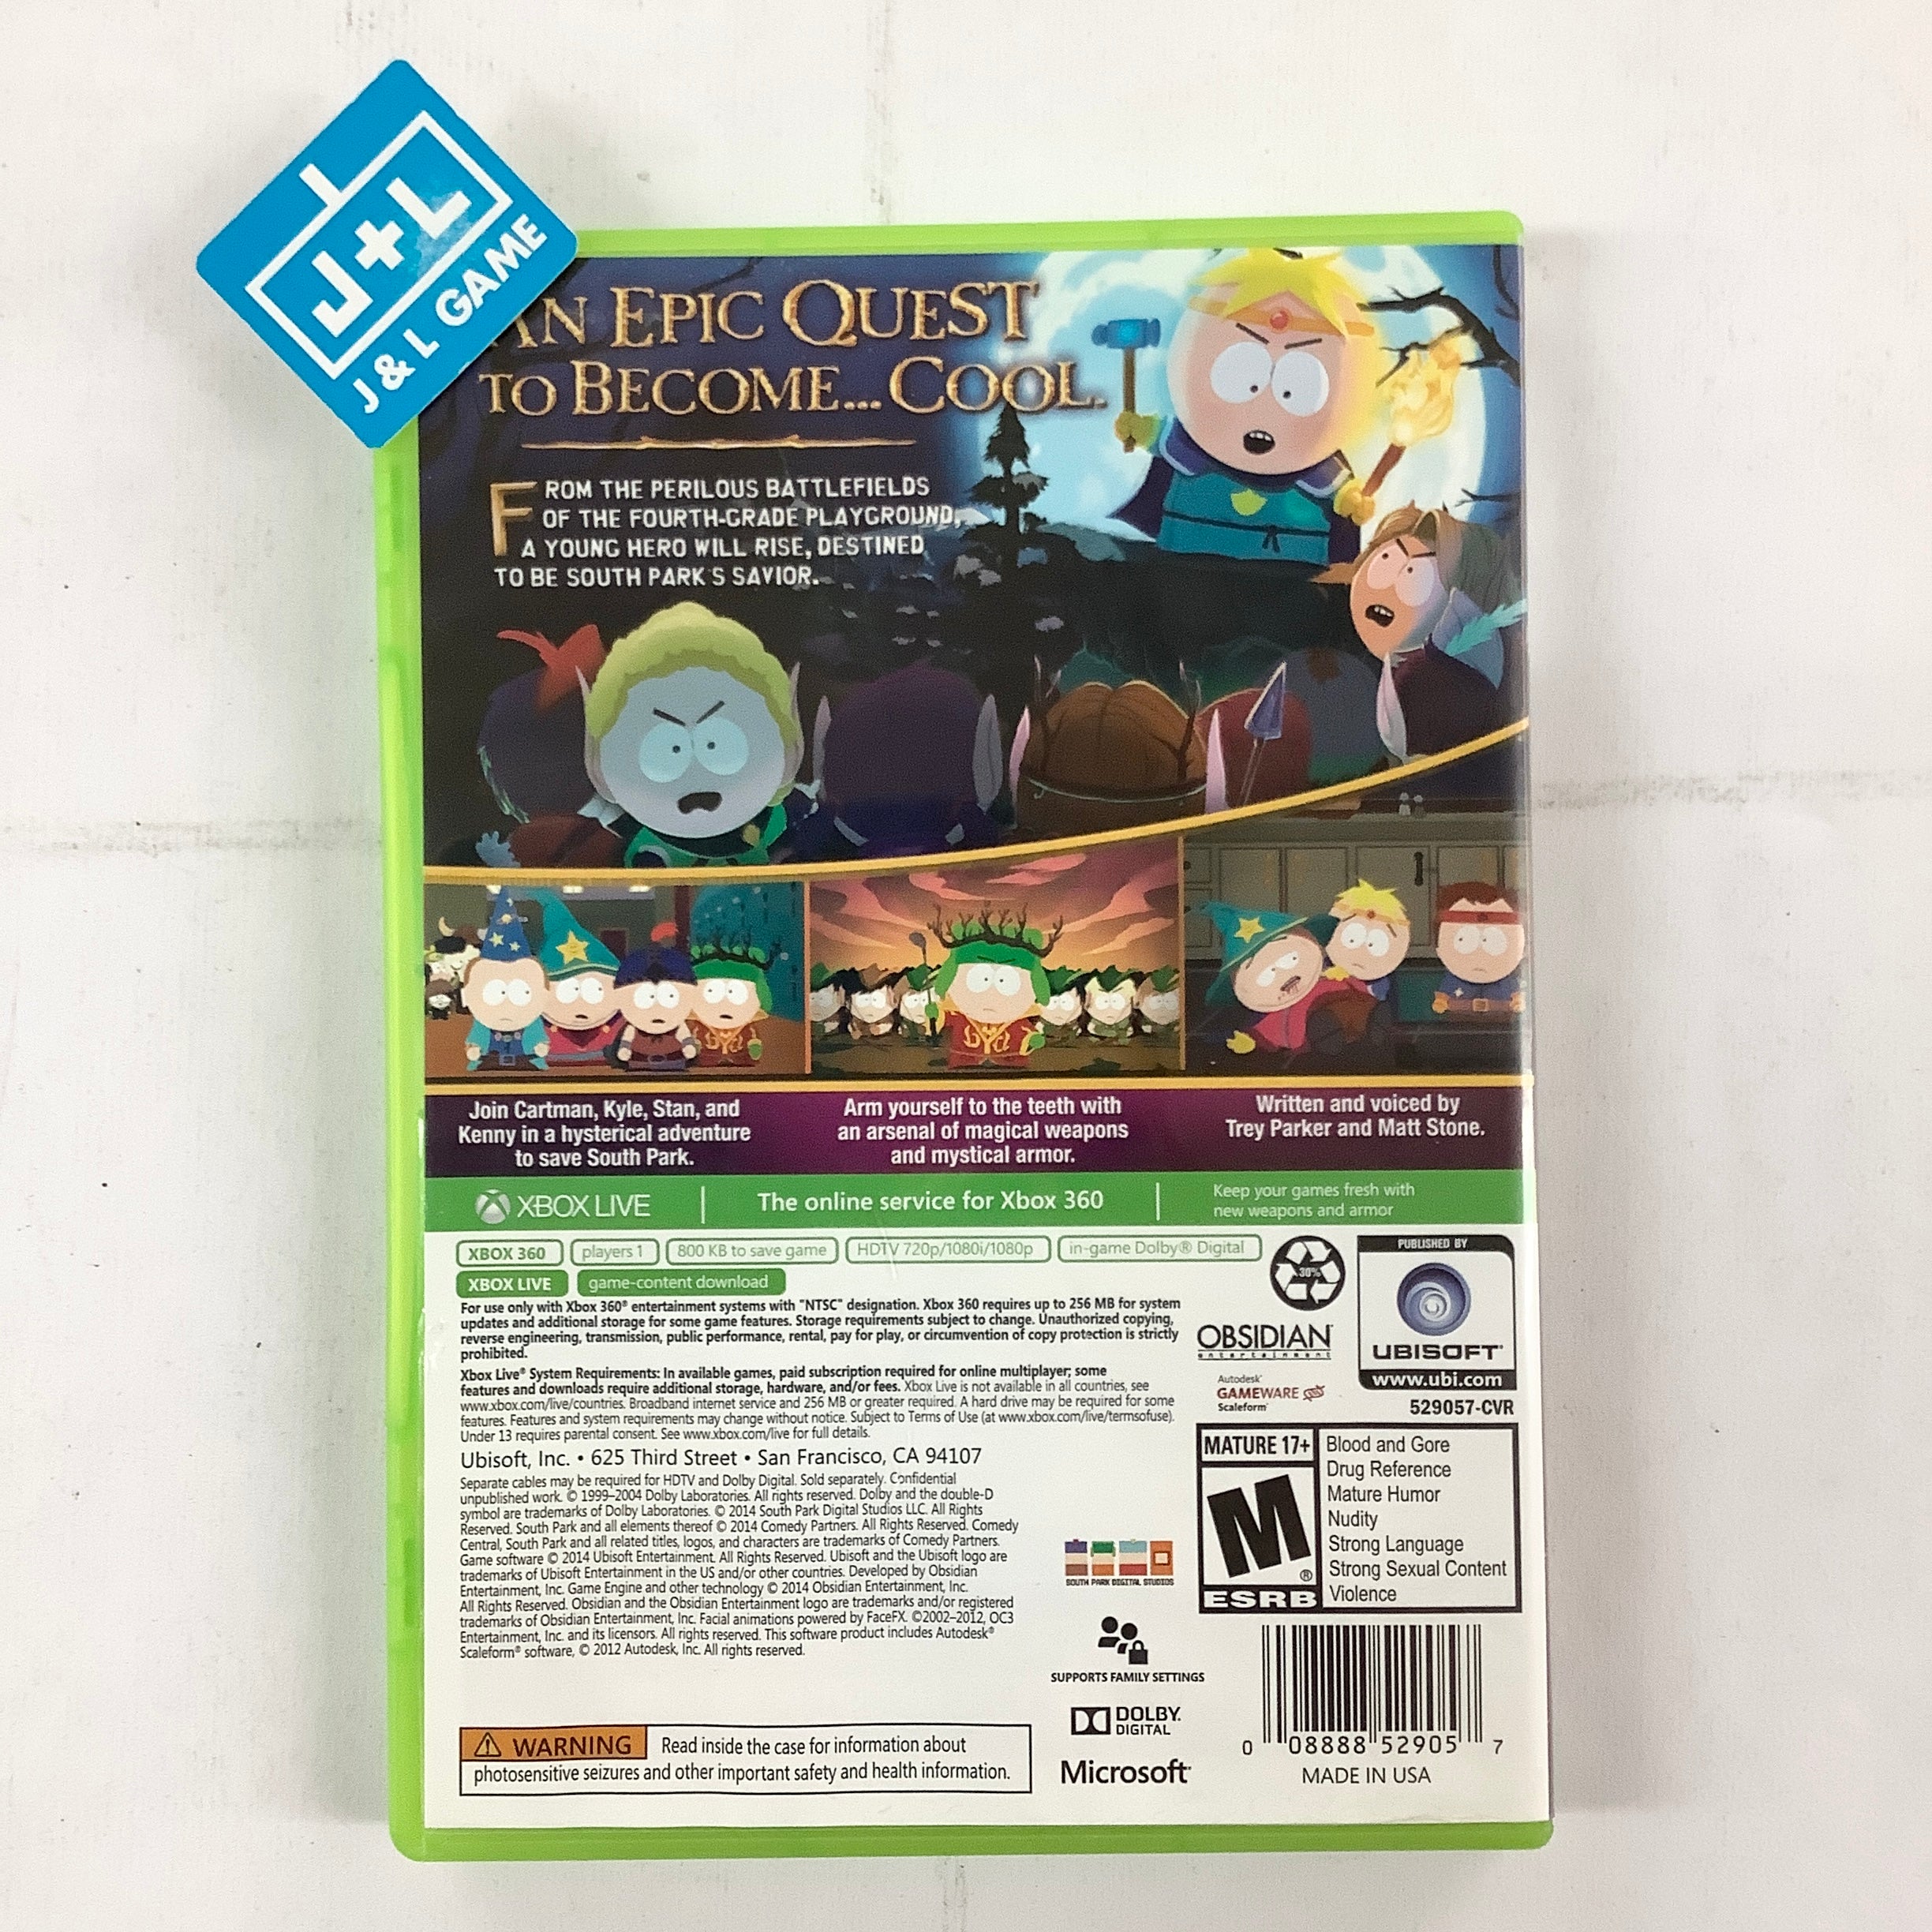 South Park: The Stick of Truth - Xbox 360 [Pre-Owned] Video Games Ubisoft   